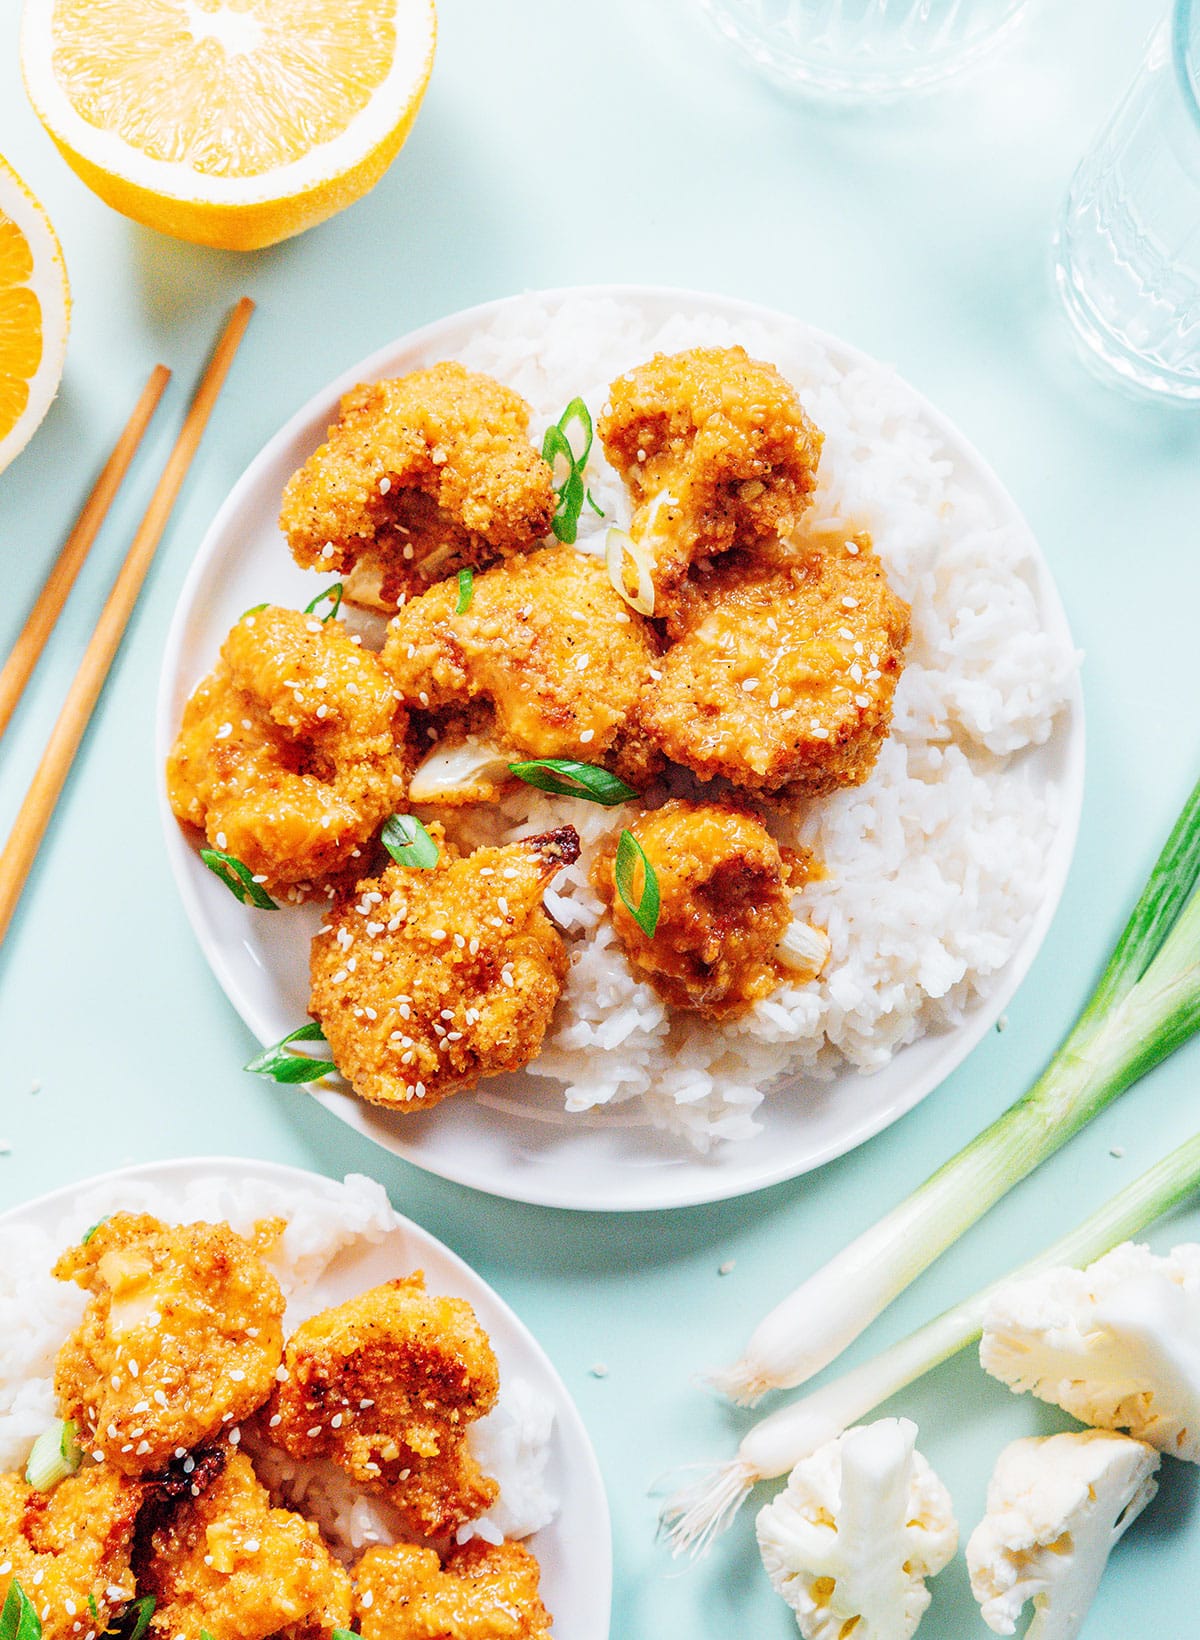 Sticky orange cauliflower with chives and sesame seeds on top of white rice.